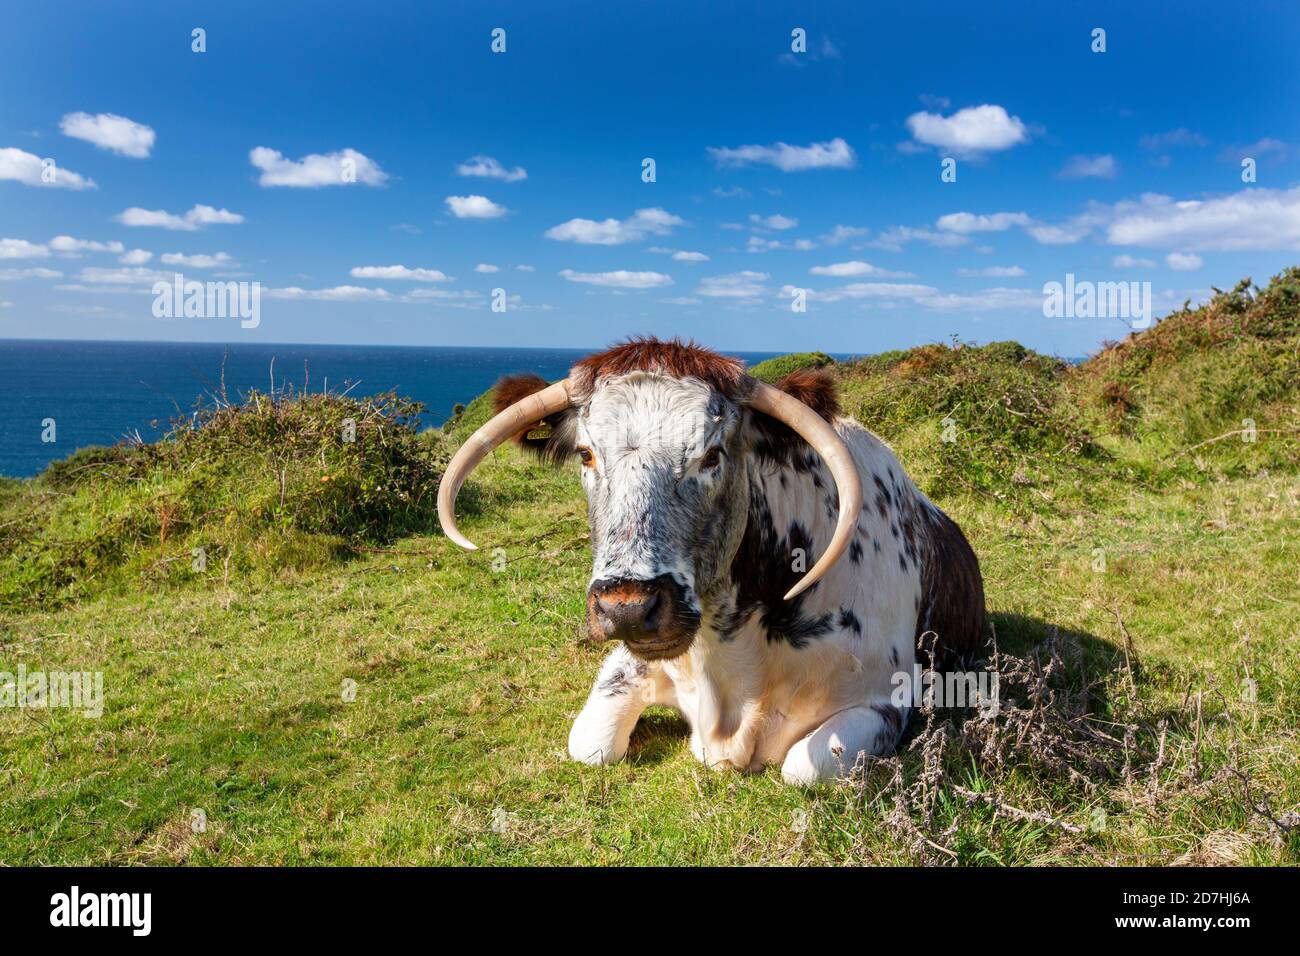 An English Long horn cow used for conservation grazing on the Cornish coast near Sennen, UK. Stock Photo